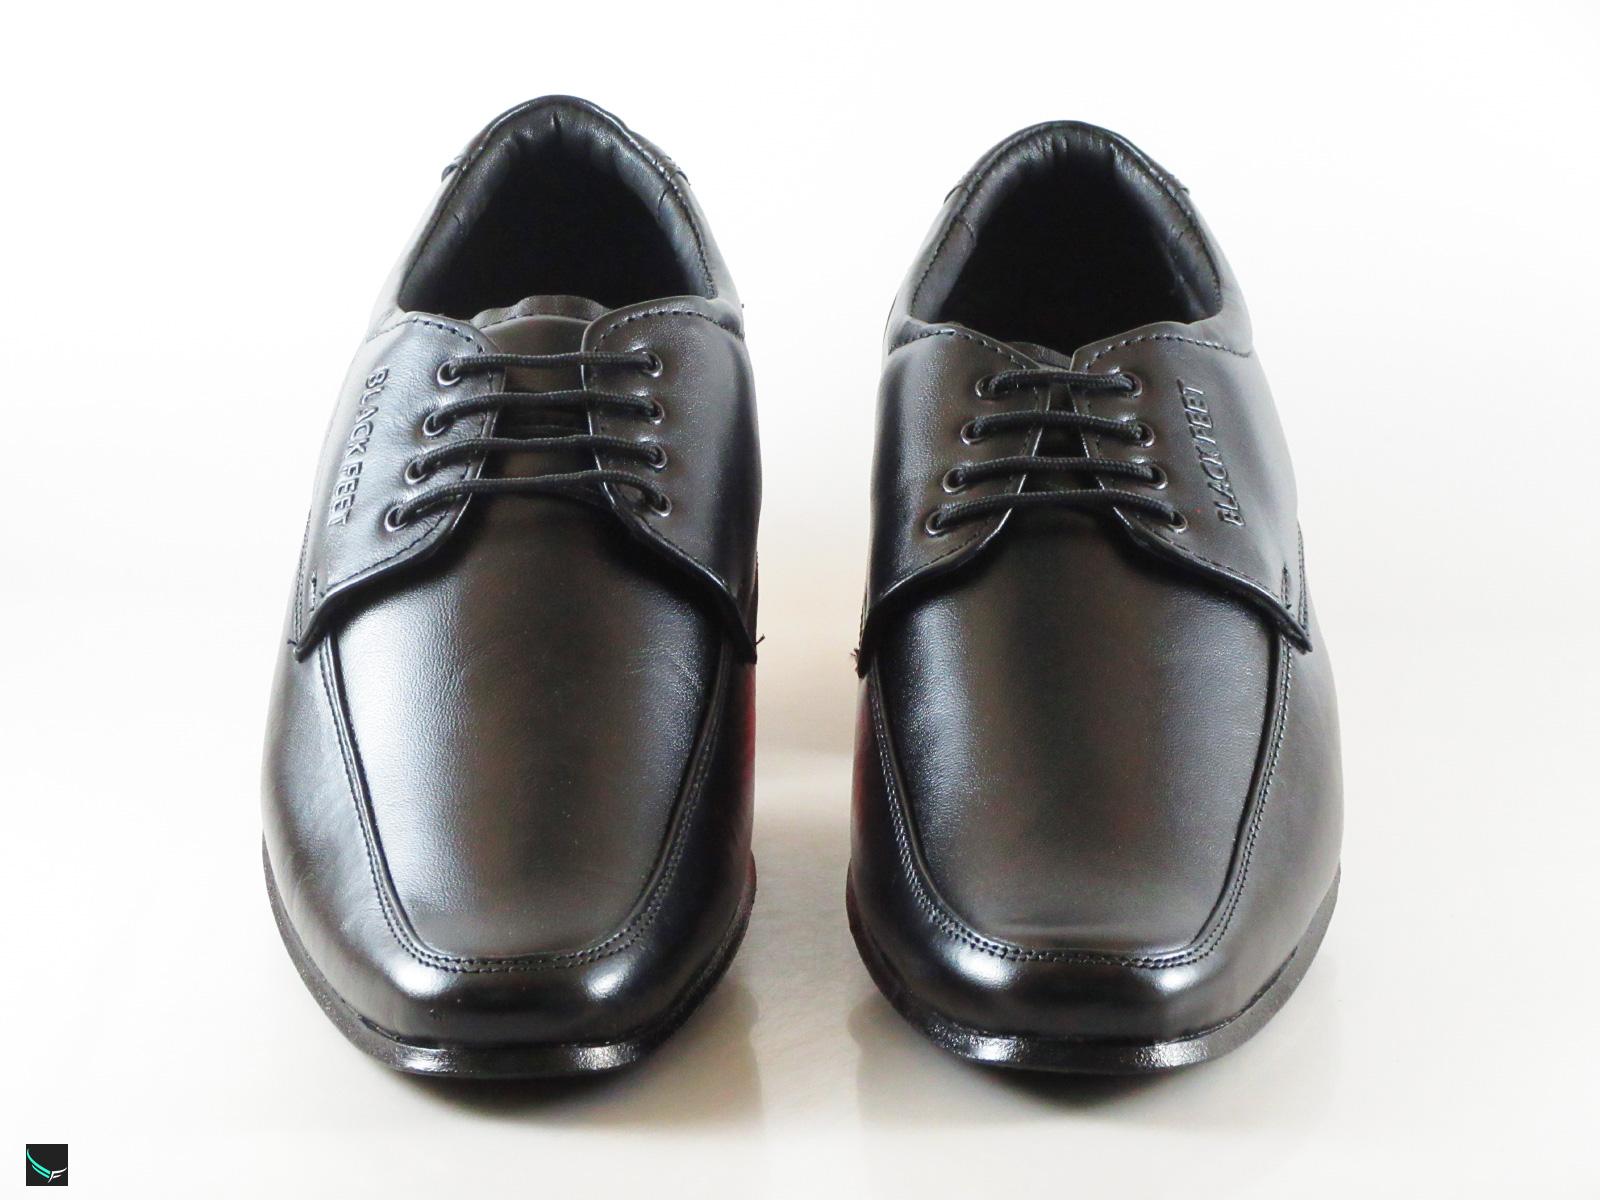 Men's Formal Leather Black Shoes - 3403 - Leather Collections On ...